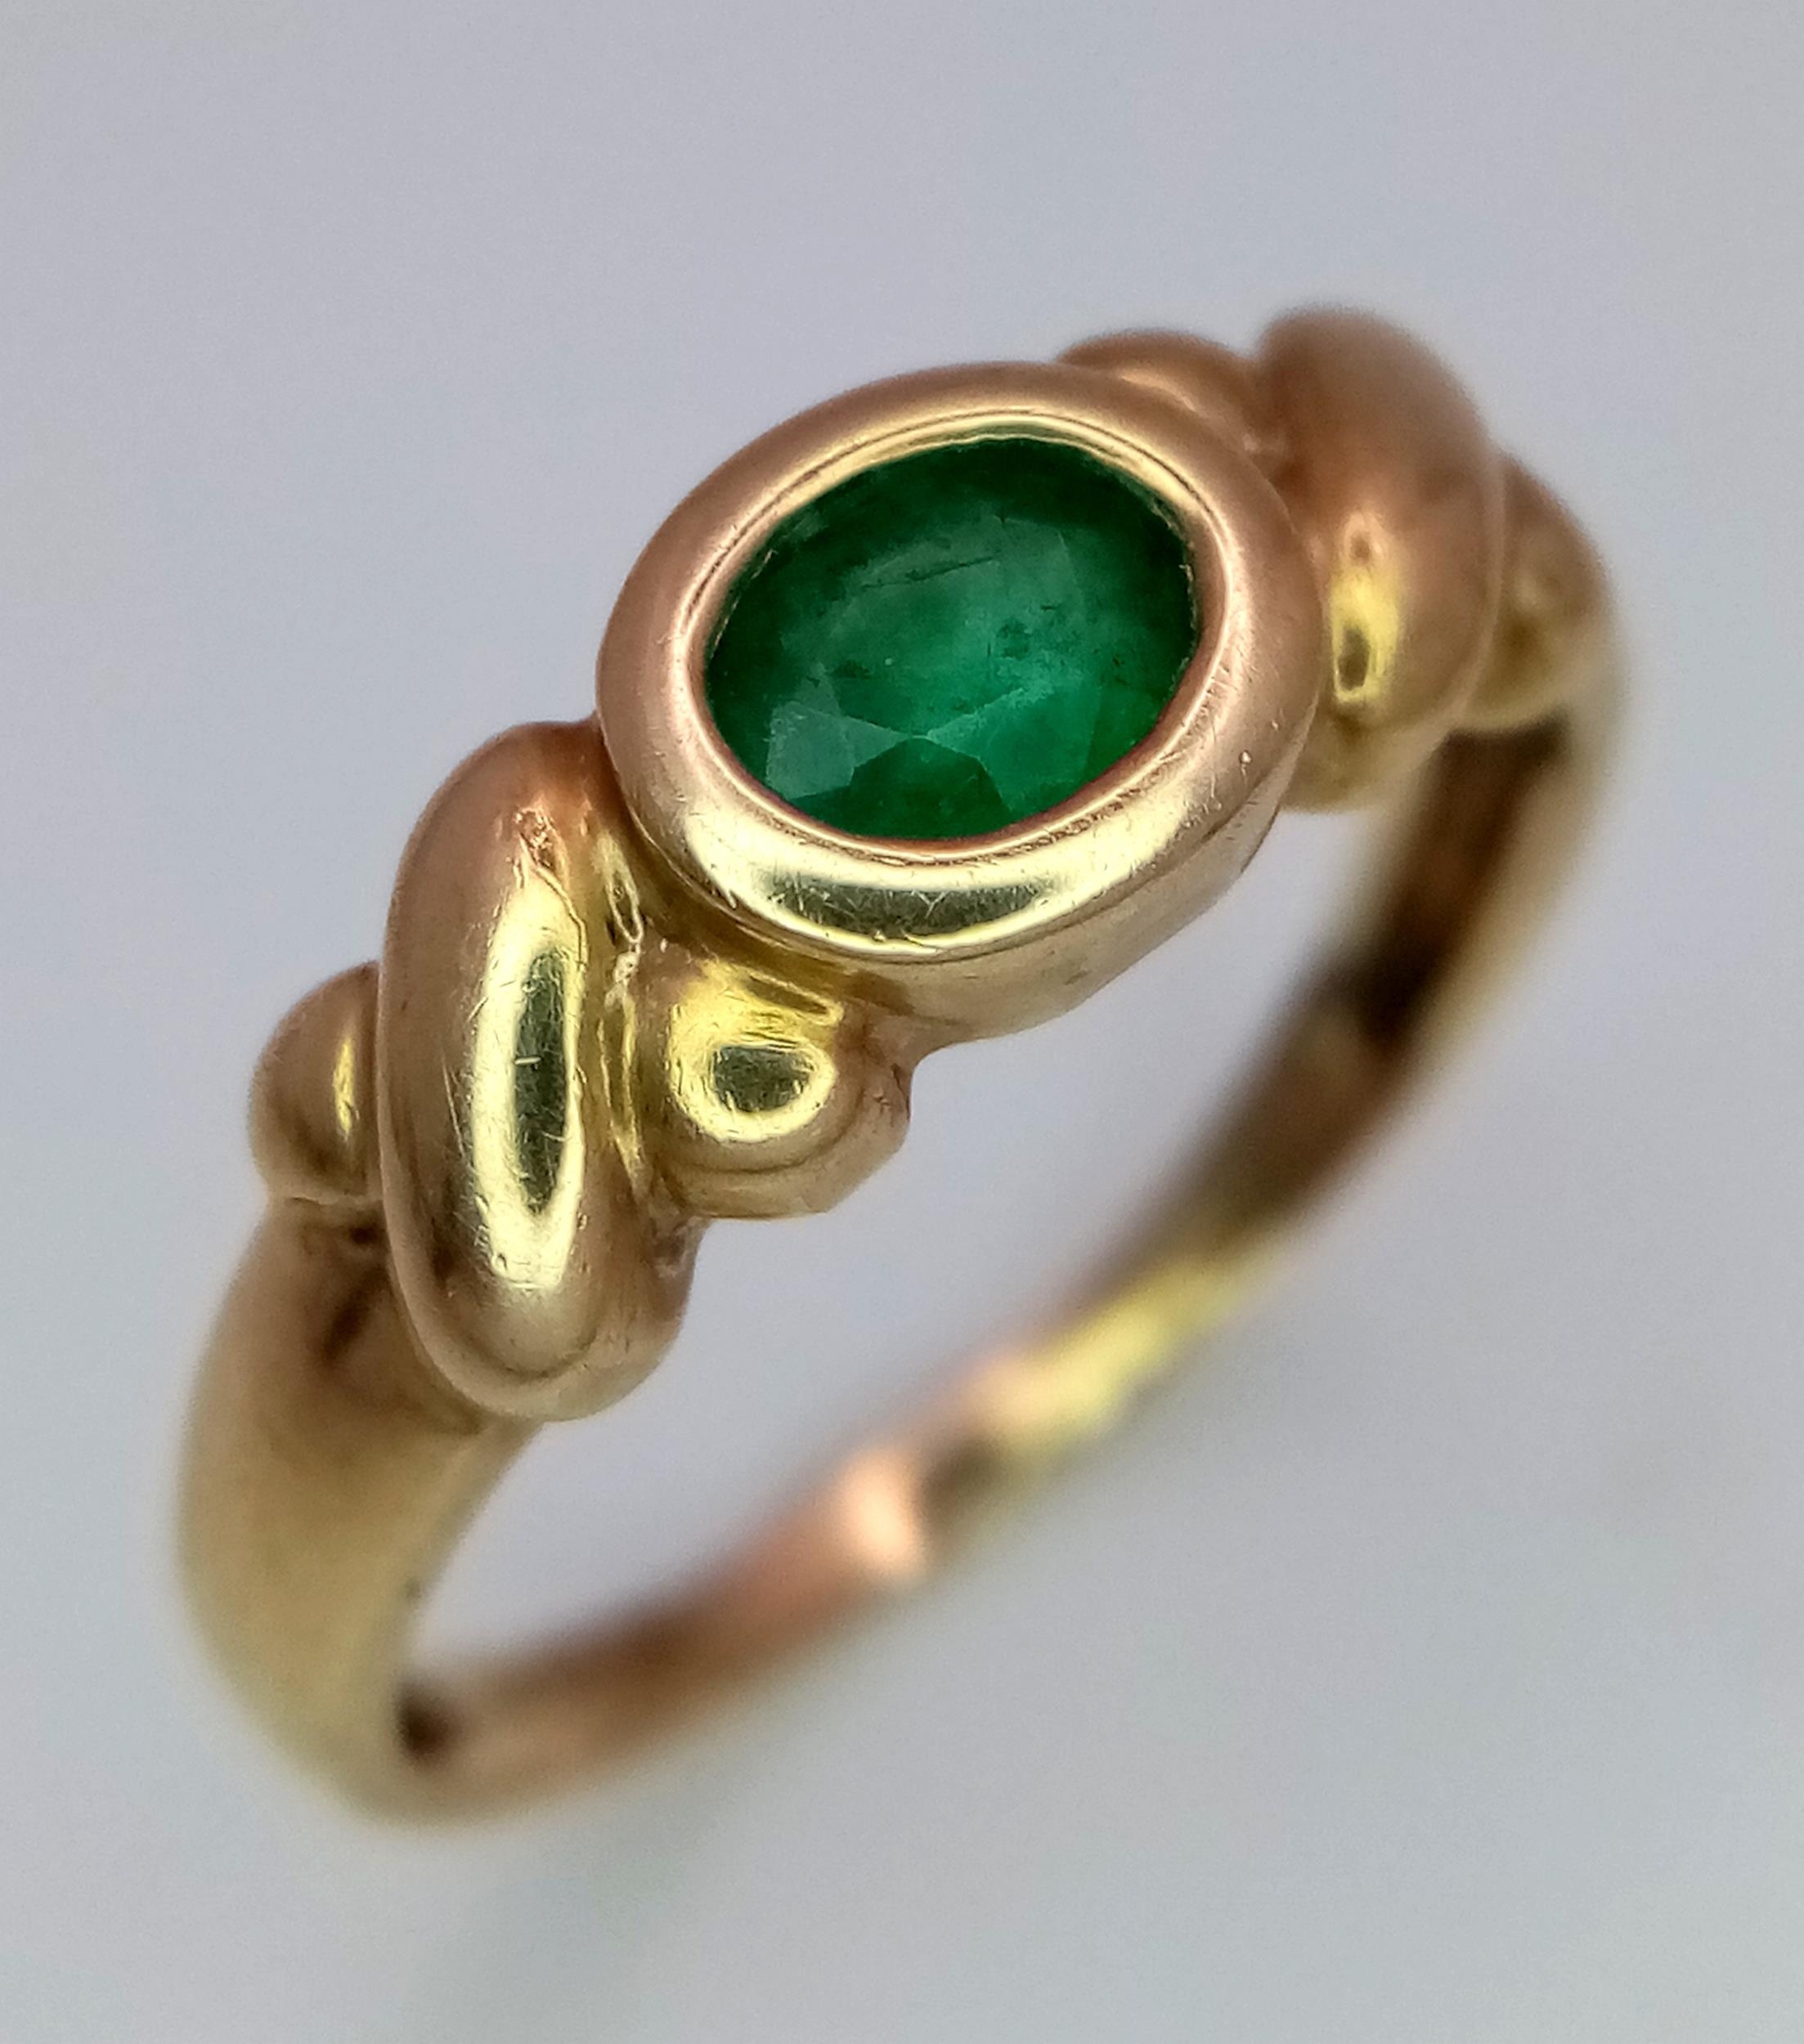 A Vintage 9K Yellow Gold and Emerald Ring. Size J. 2g total weight.